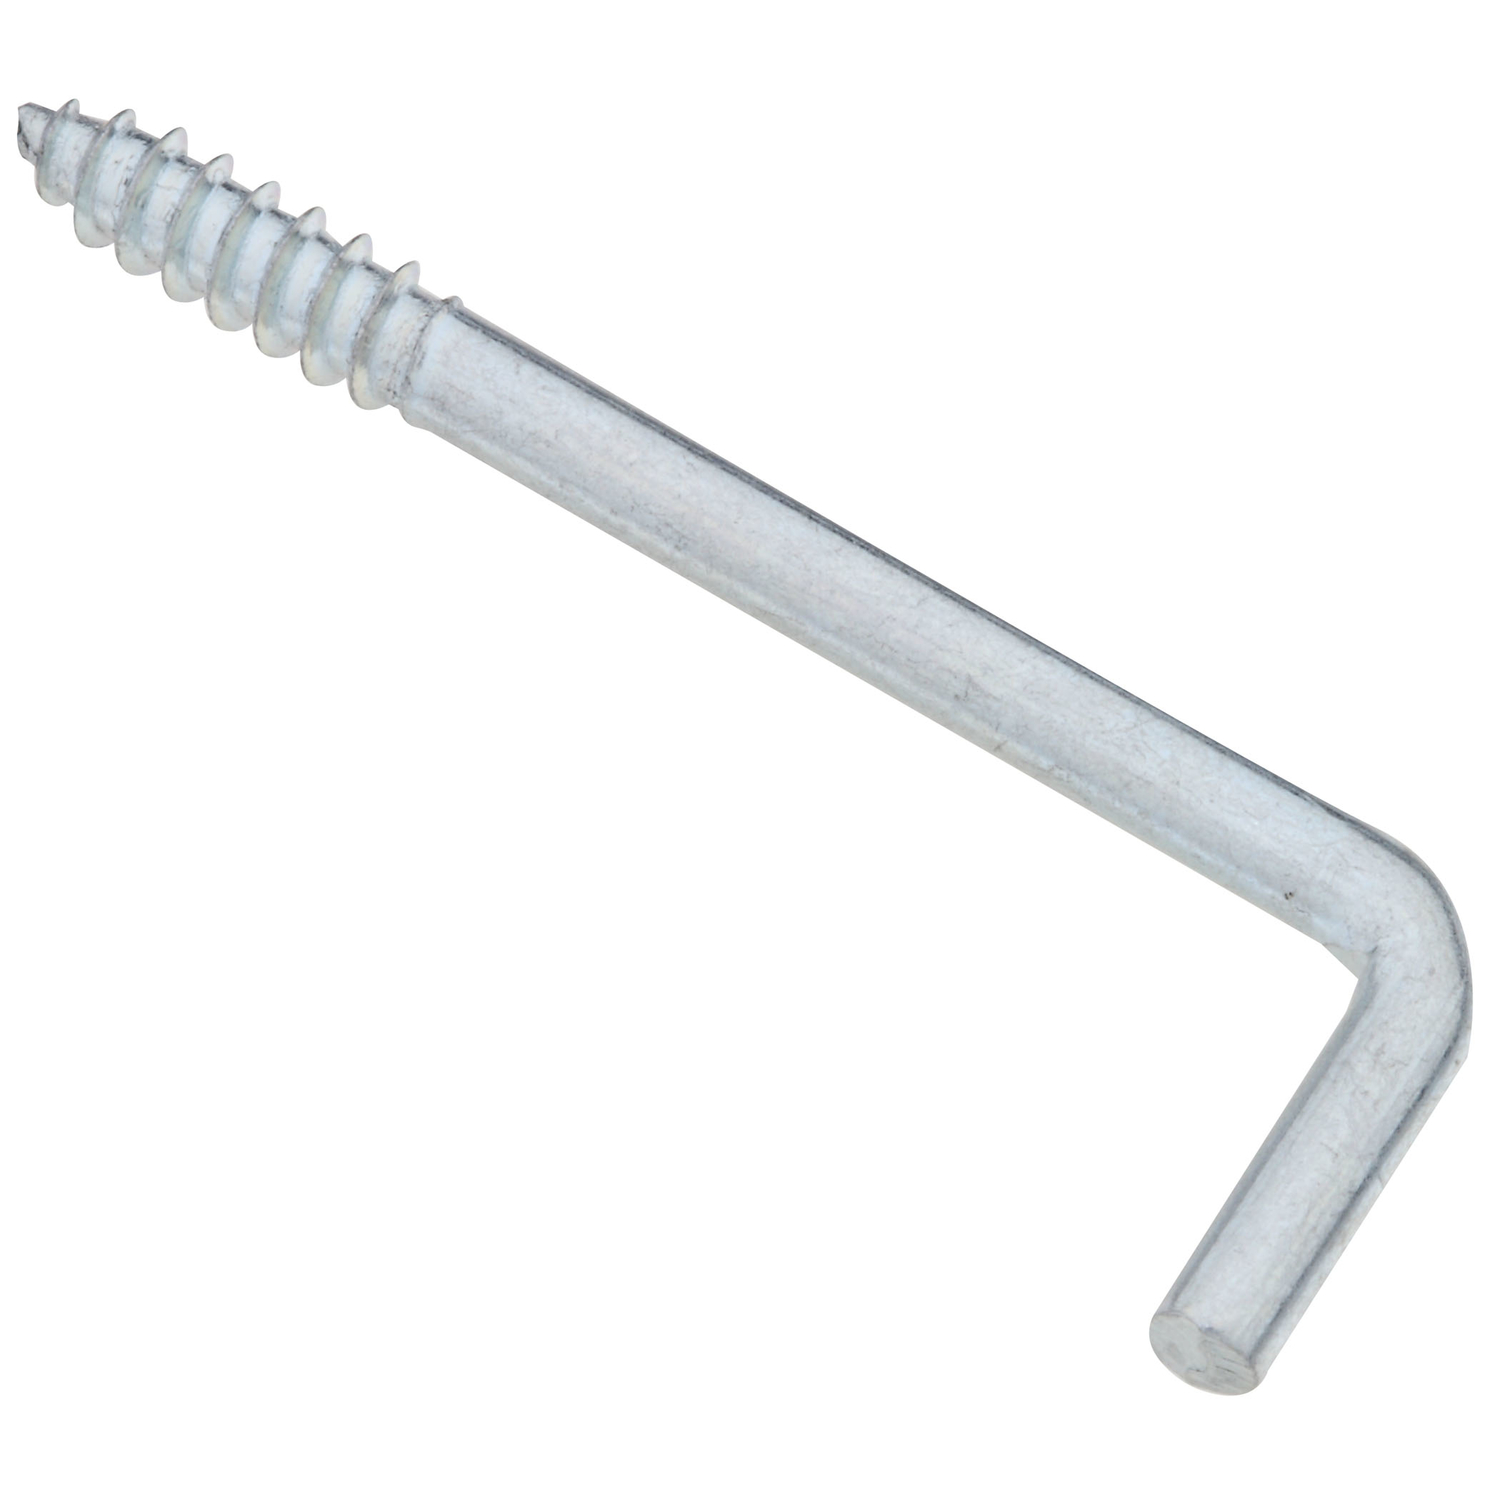 Photos - Nail / Screw / Fastener National Hardware Zinc-Plated Silver Steel 2-1/4 in. L Square Bend Hook 5 